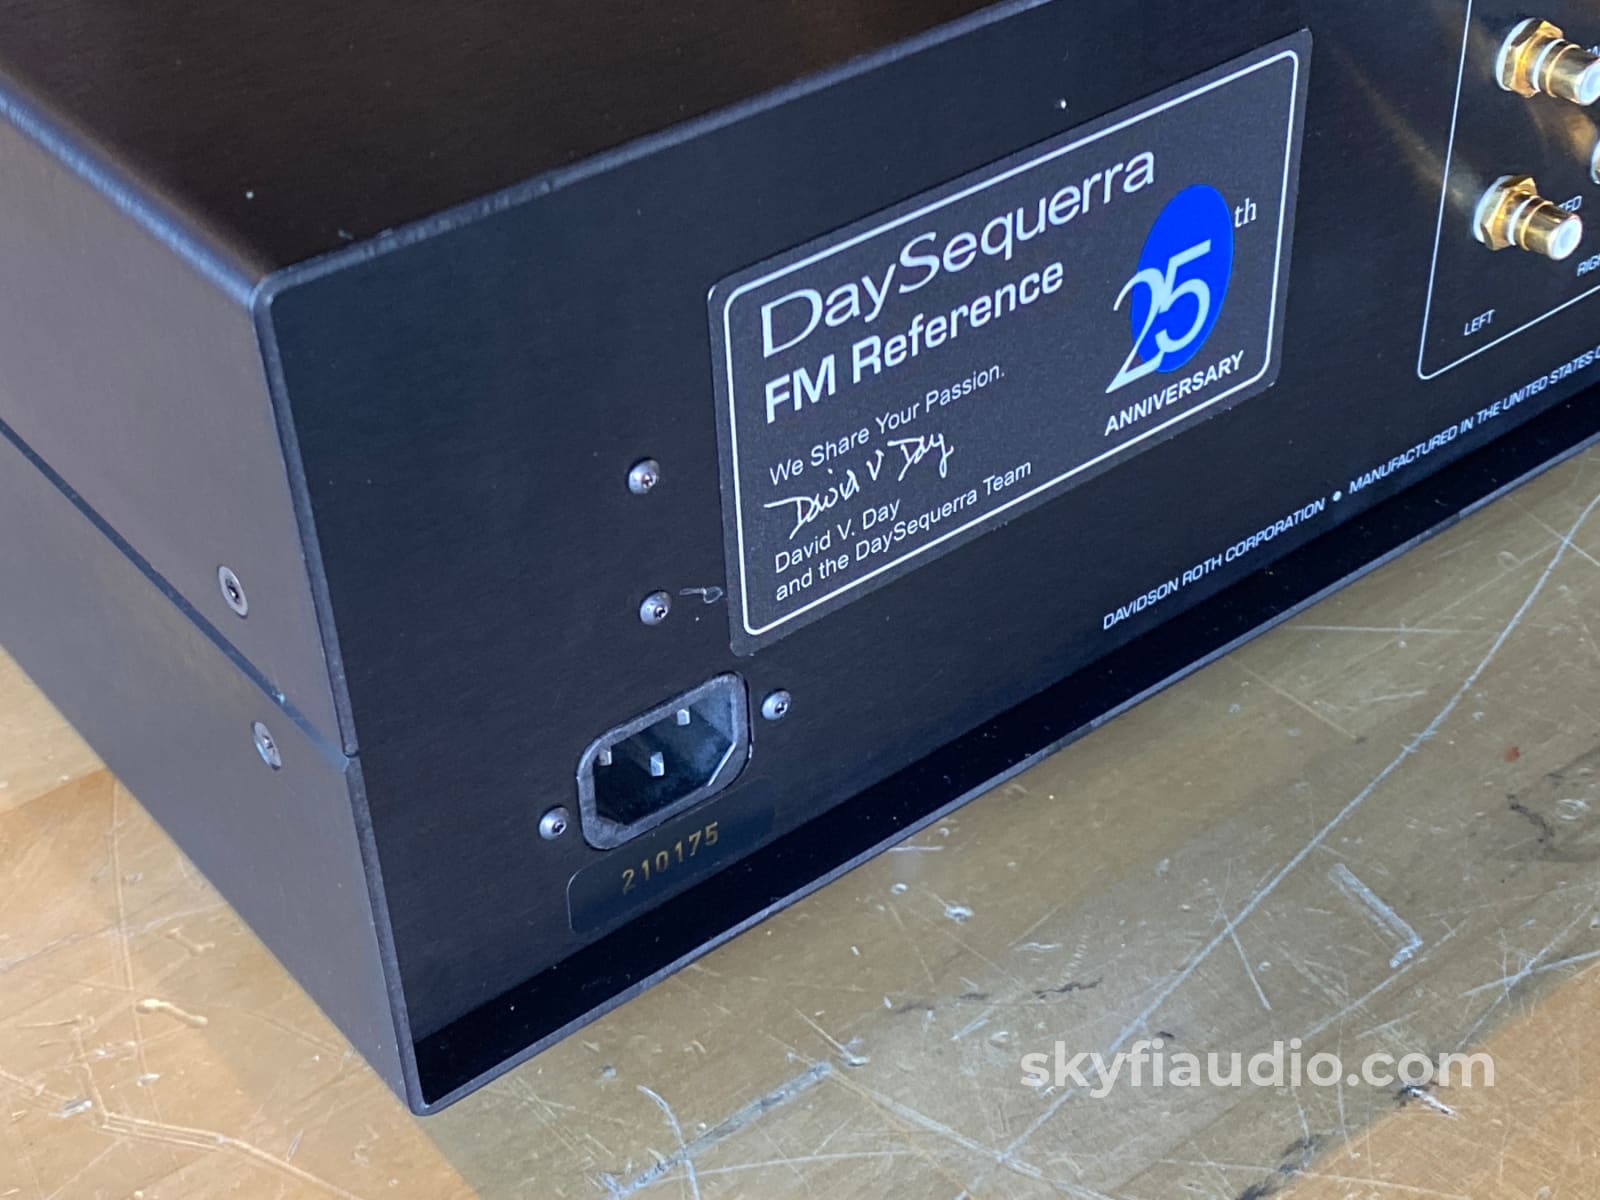 Day Sequerra 25Th Anniversary Fm Reference Tuner - The Ultimate